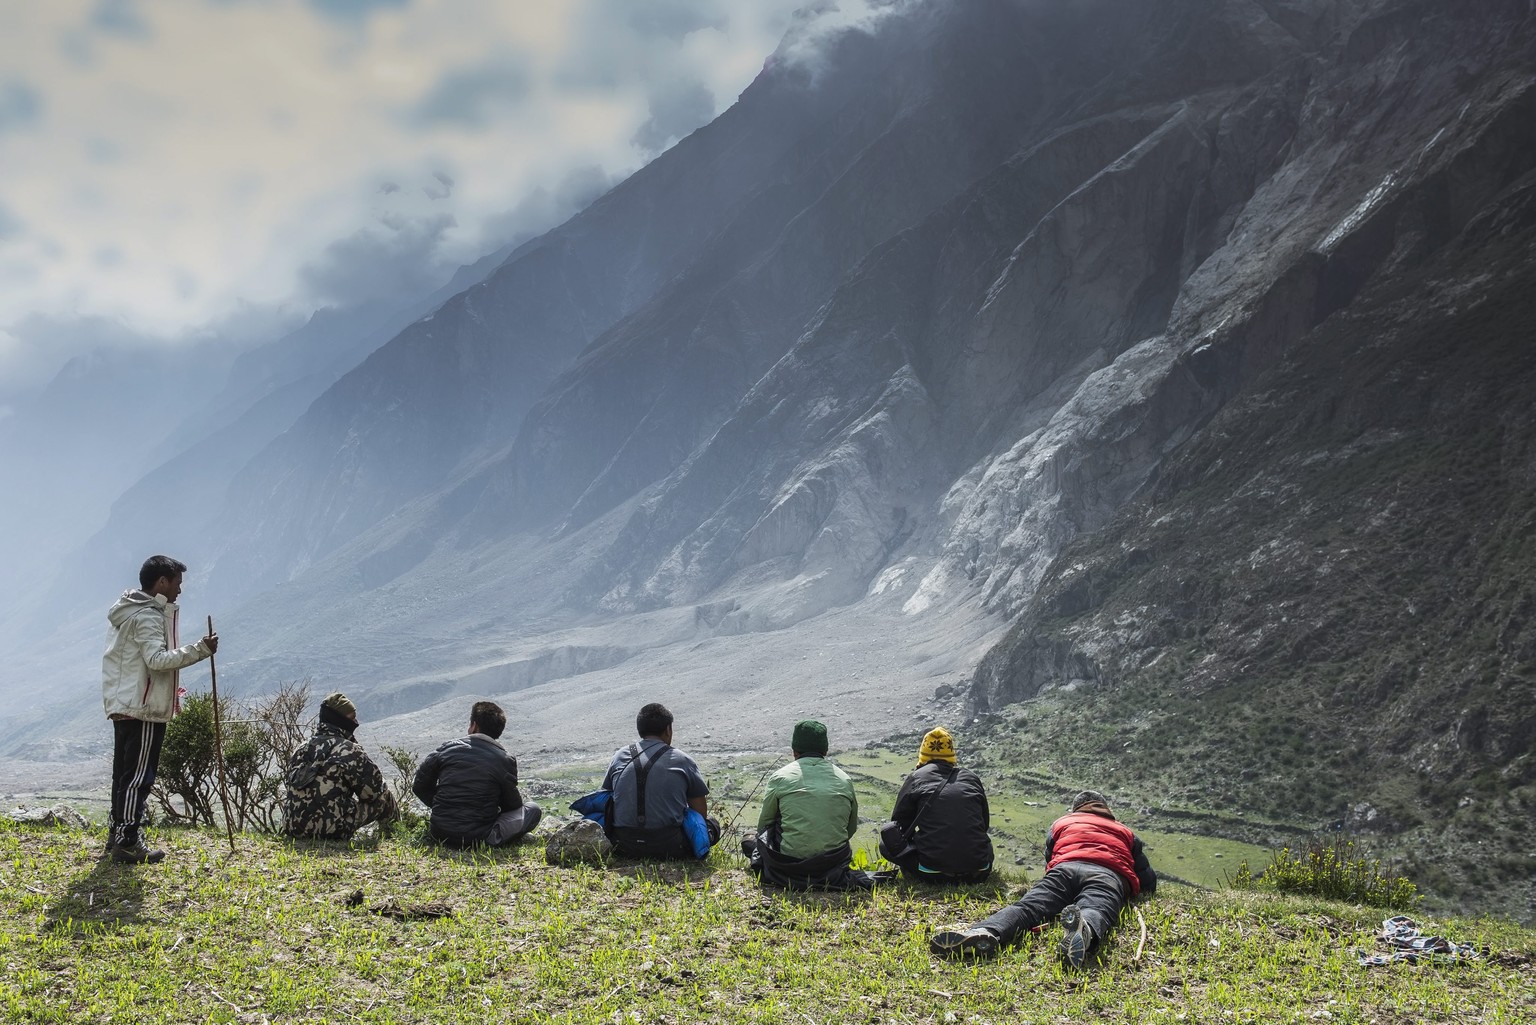 epa04789646 A picture made available 08 June 2015 shows local people watching the site of an landslide caused by an earthquake in Langtang valley, Nepal, 04 June 2015. Nepalese army have started a sea ...